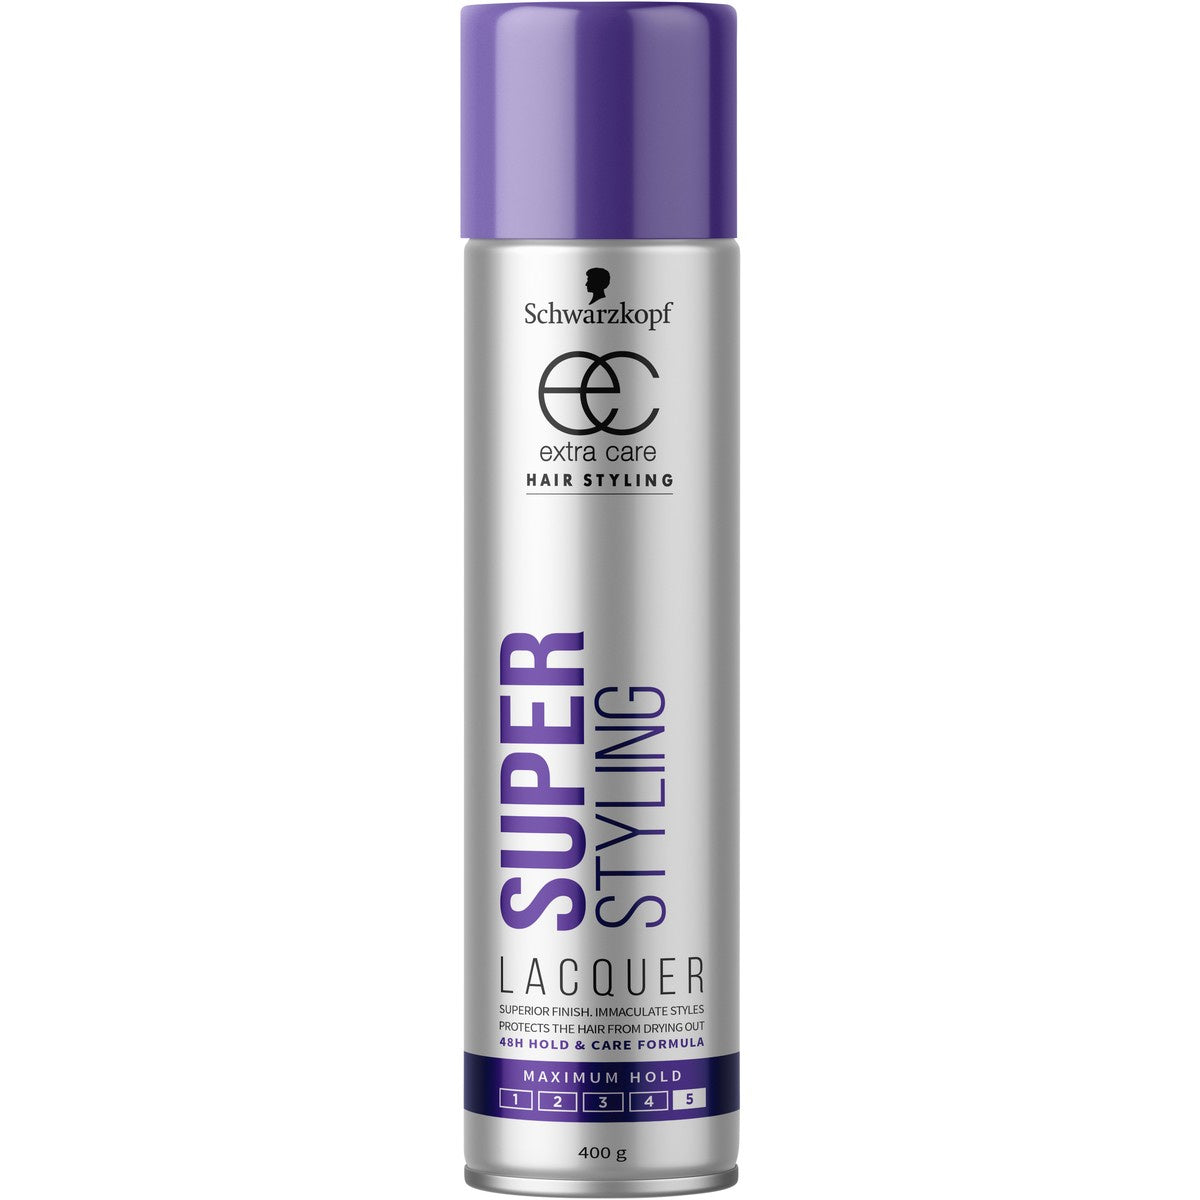 Schwarzkopf Extra Care Super Styling Lacquer 400G